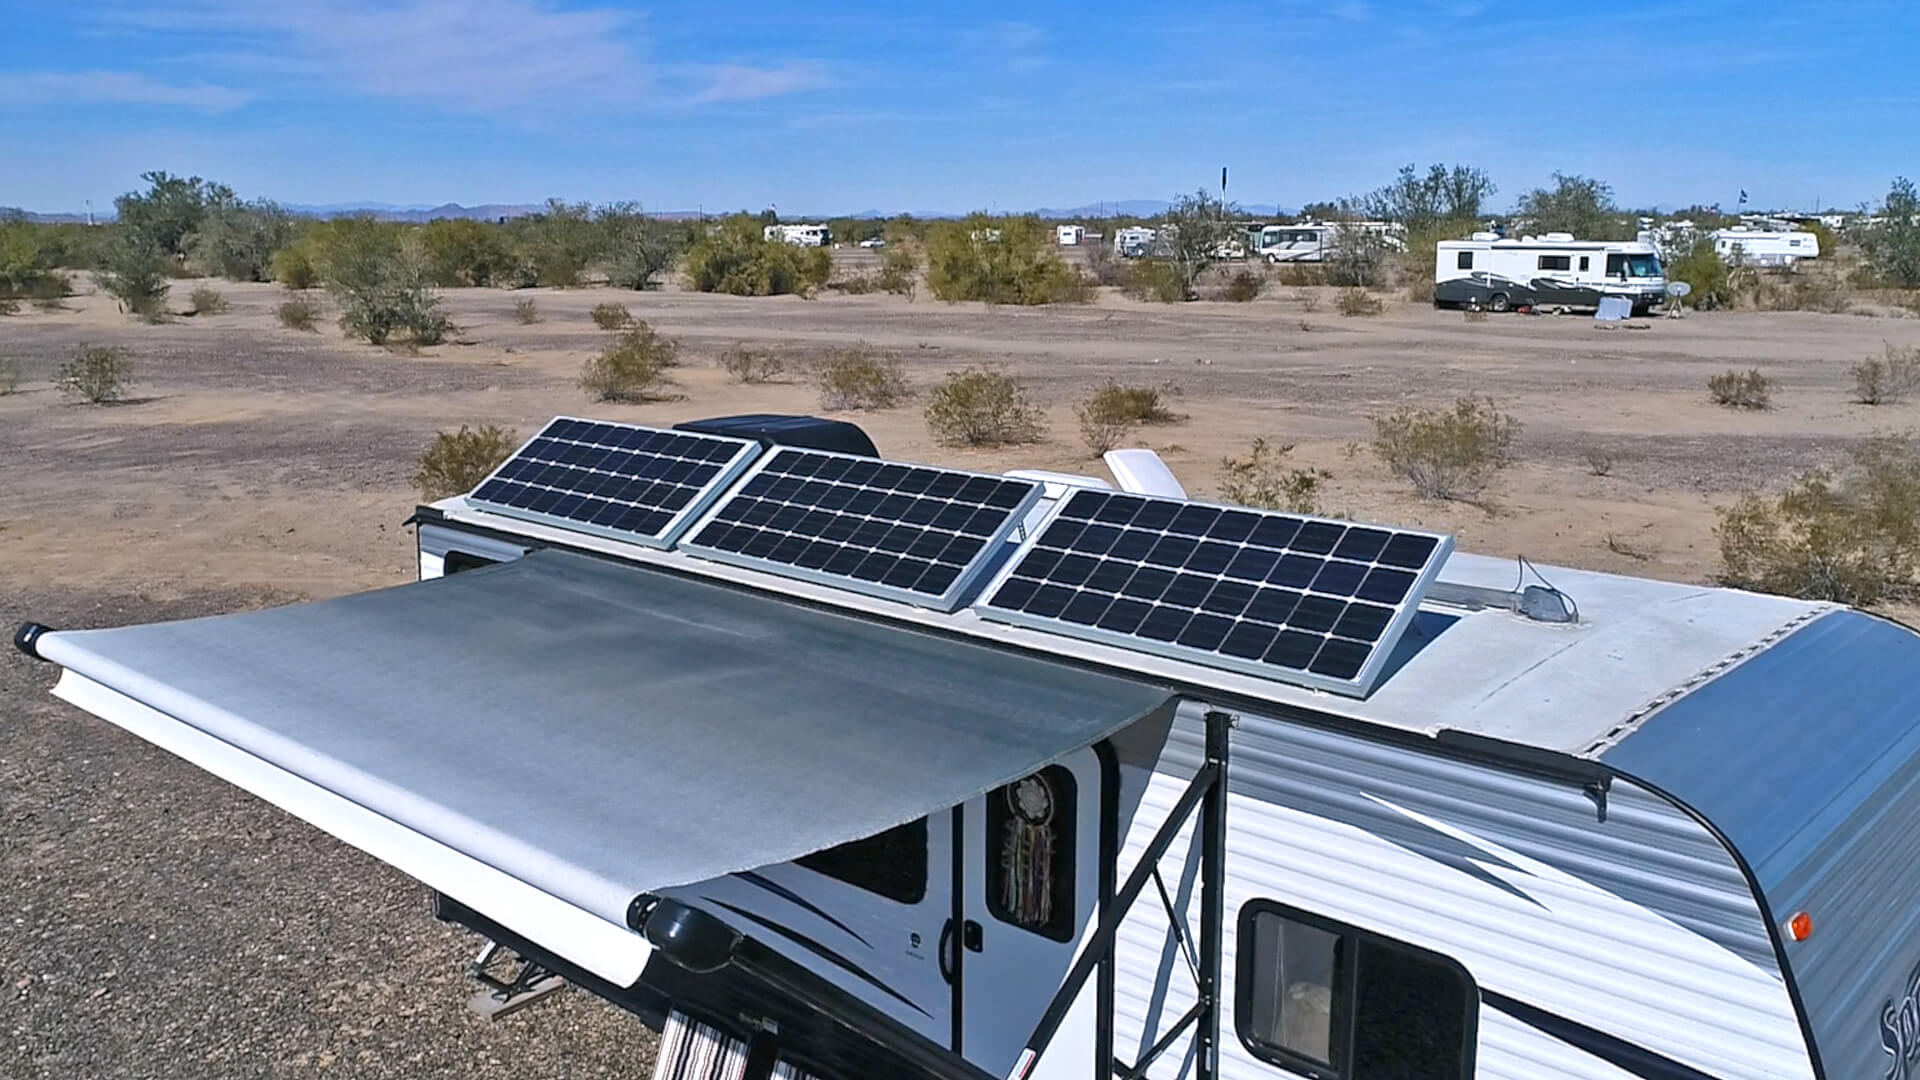 Guide On Solar Air Conditioner for RV (Recreational Vehicle)